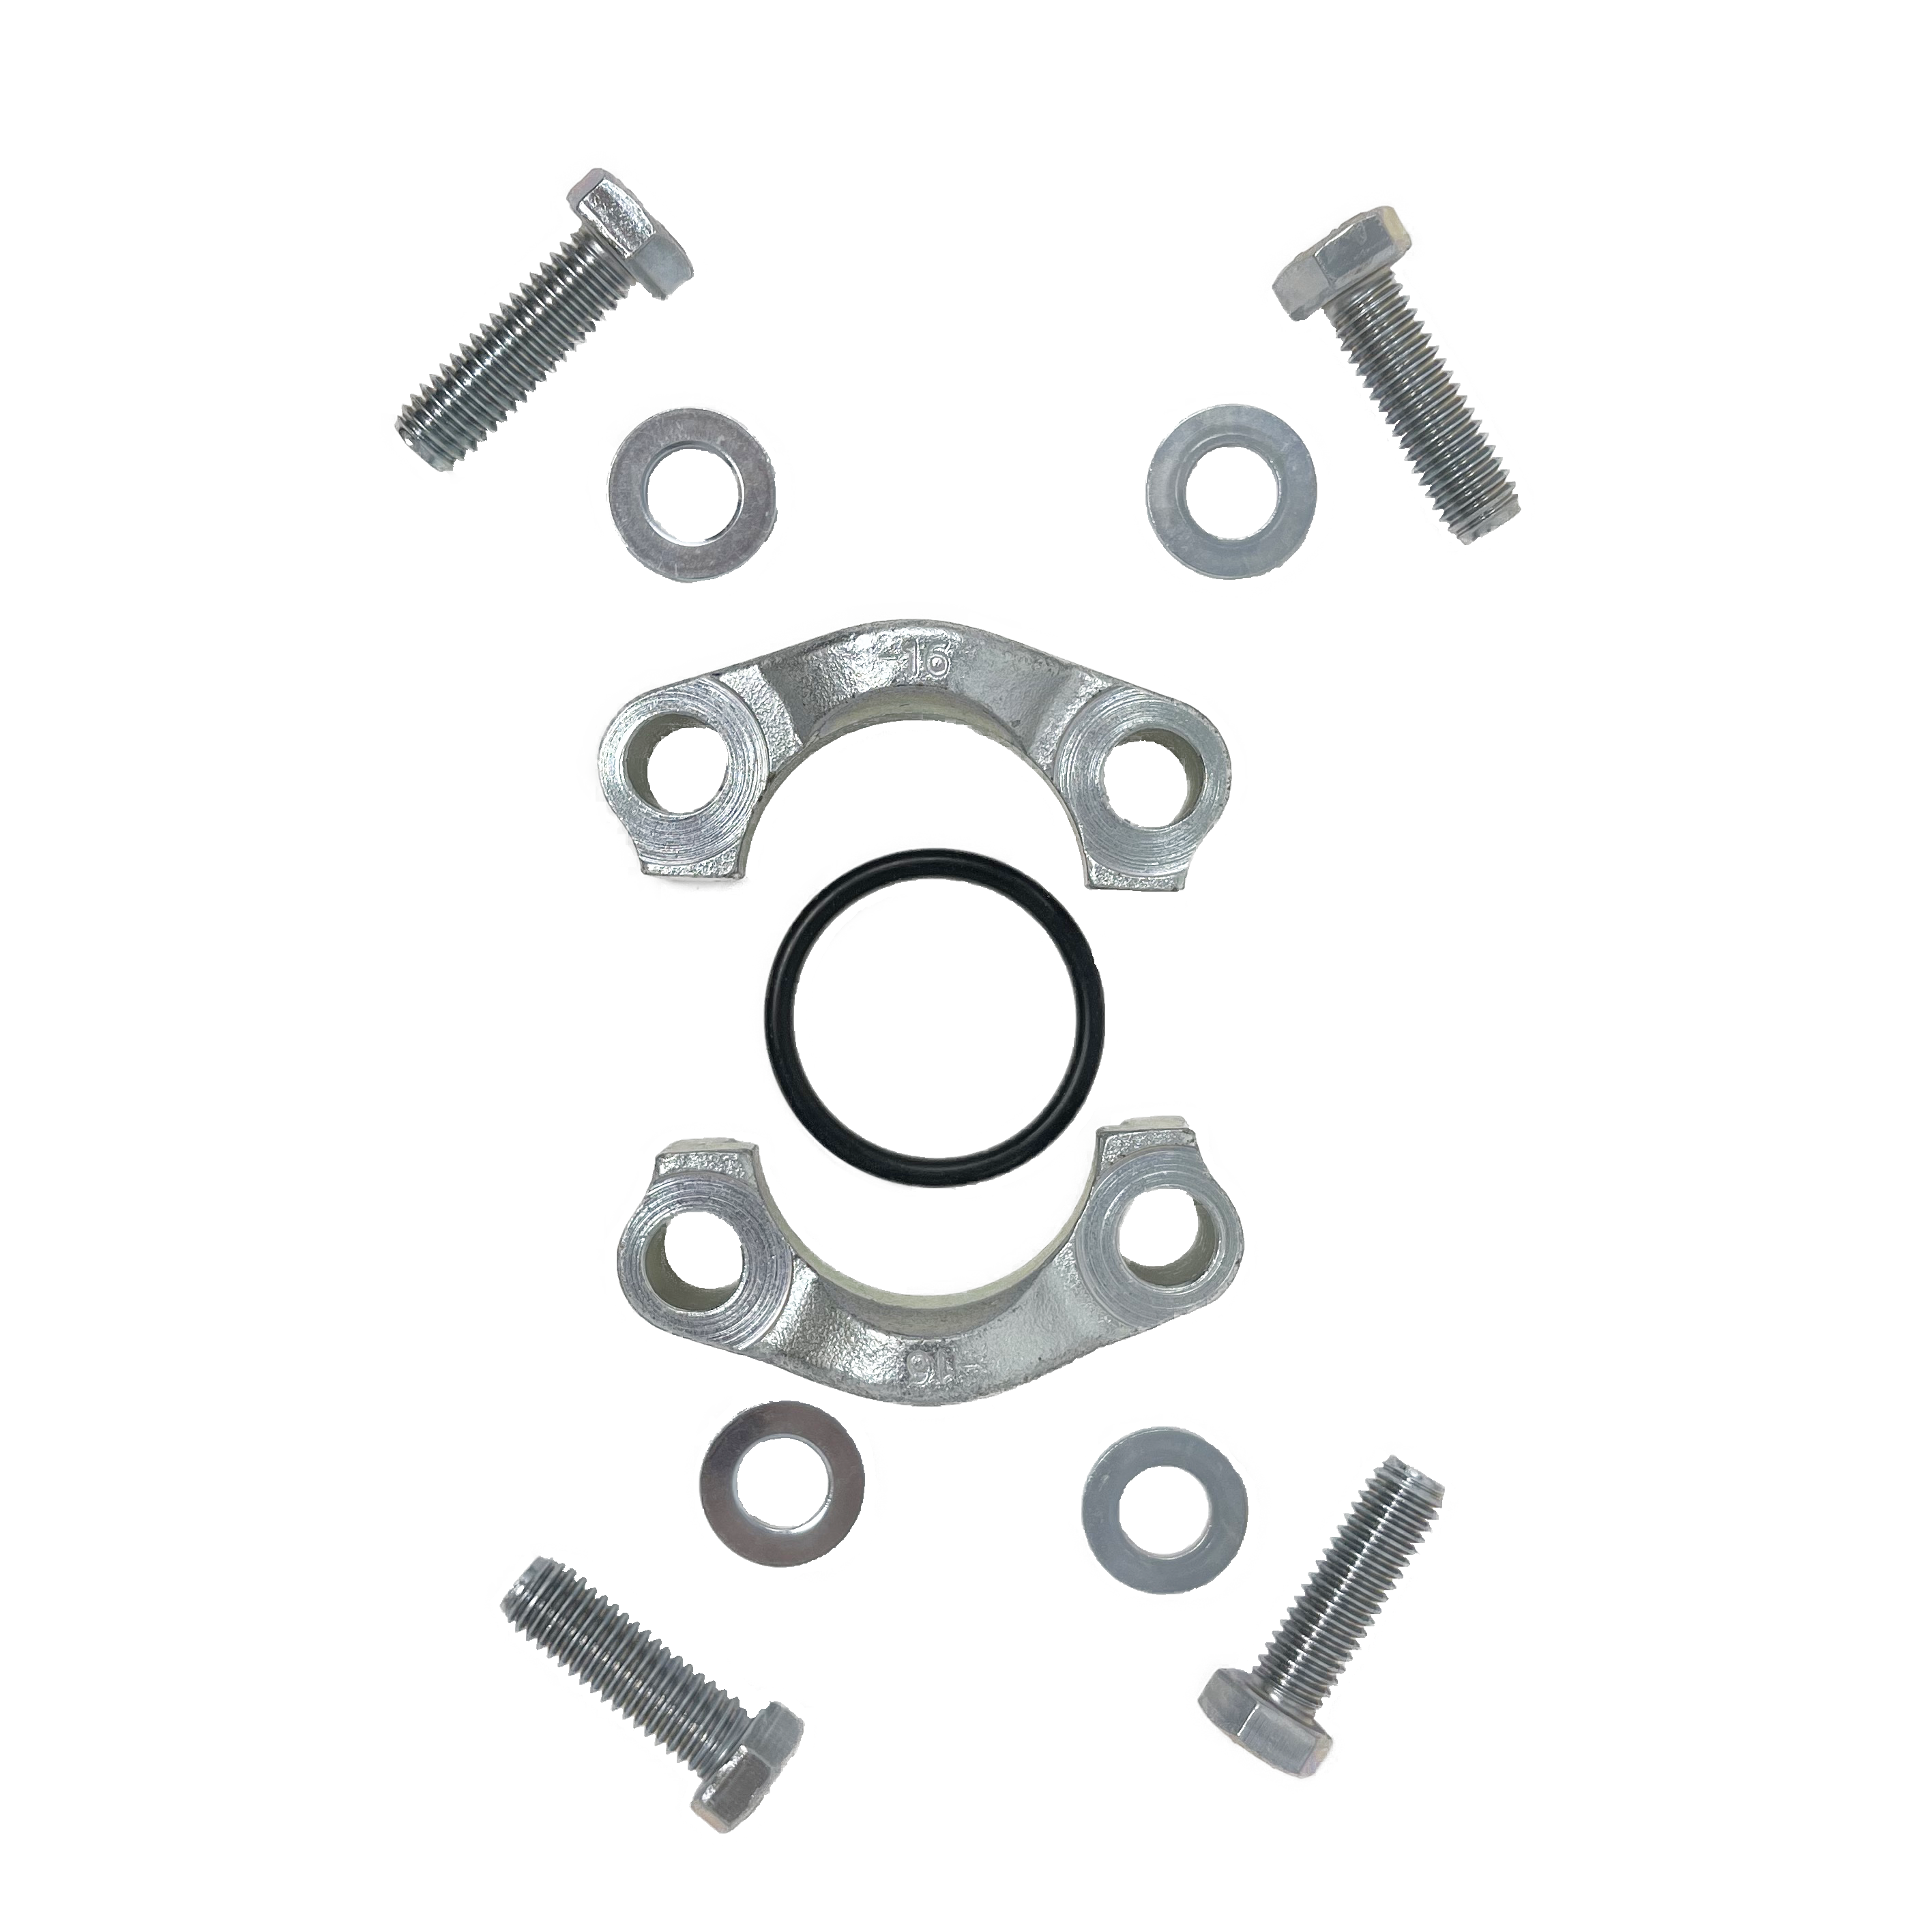 24SFO : AFP Split Flange Kit, Steel, 1.5" Code 61, 3000psi, Includes two (2) halves, four (4) bolts, four (4) washers, and one (1) O-Ring